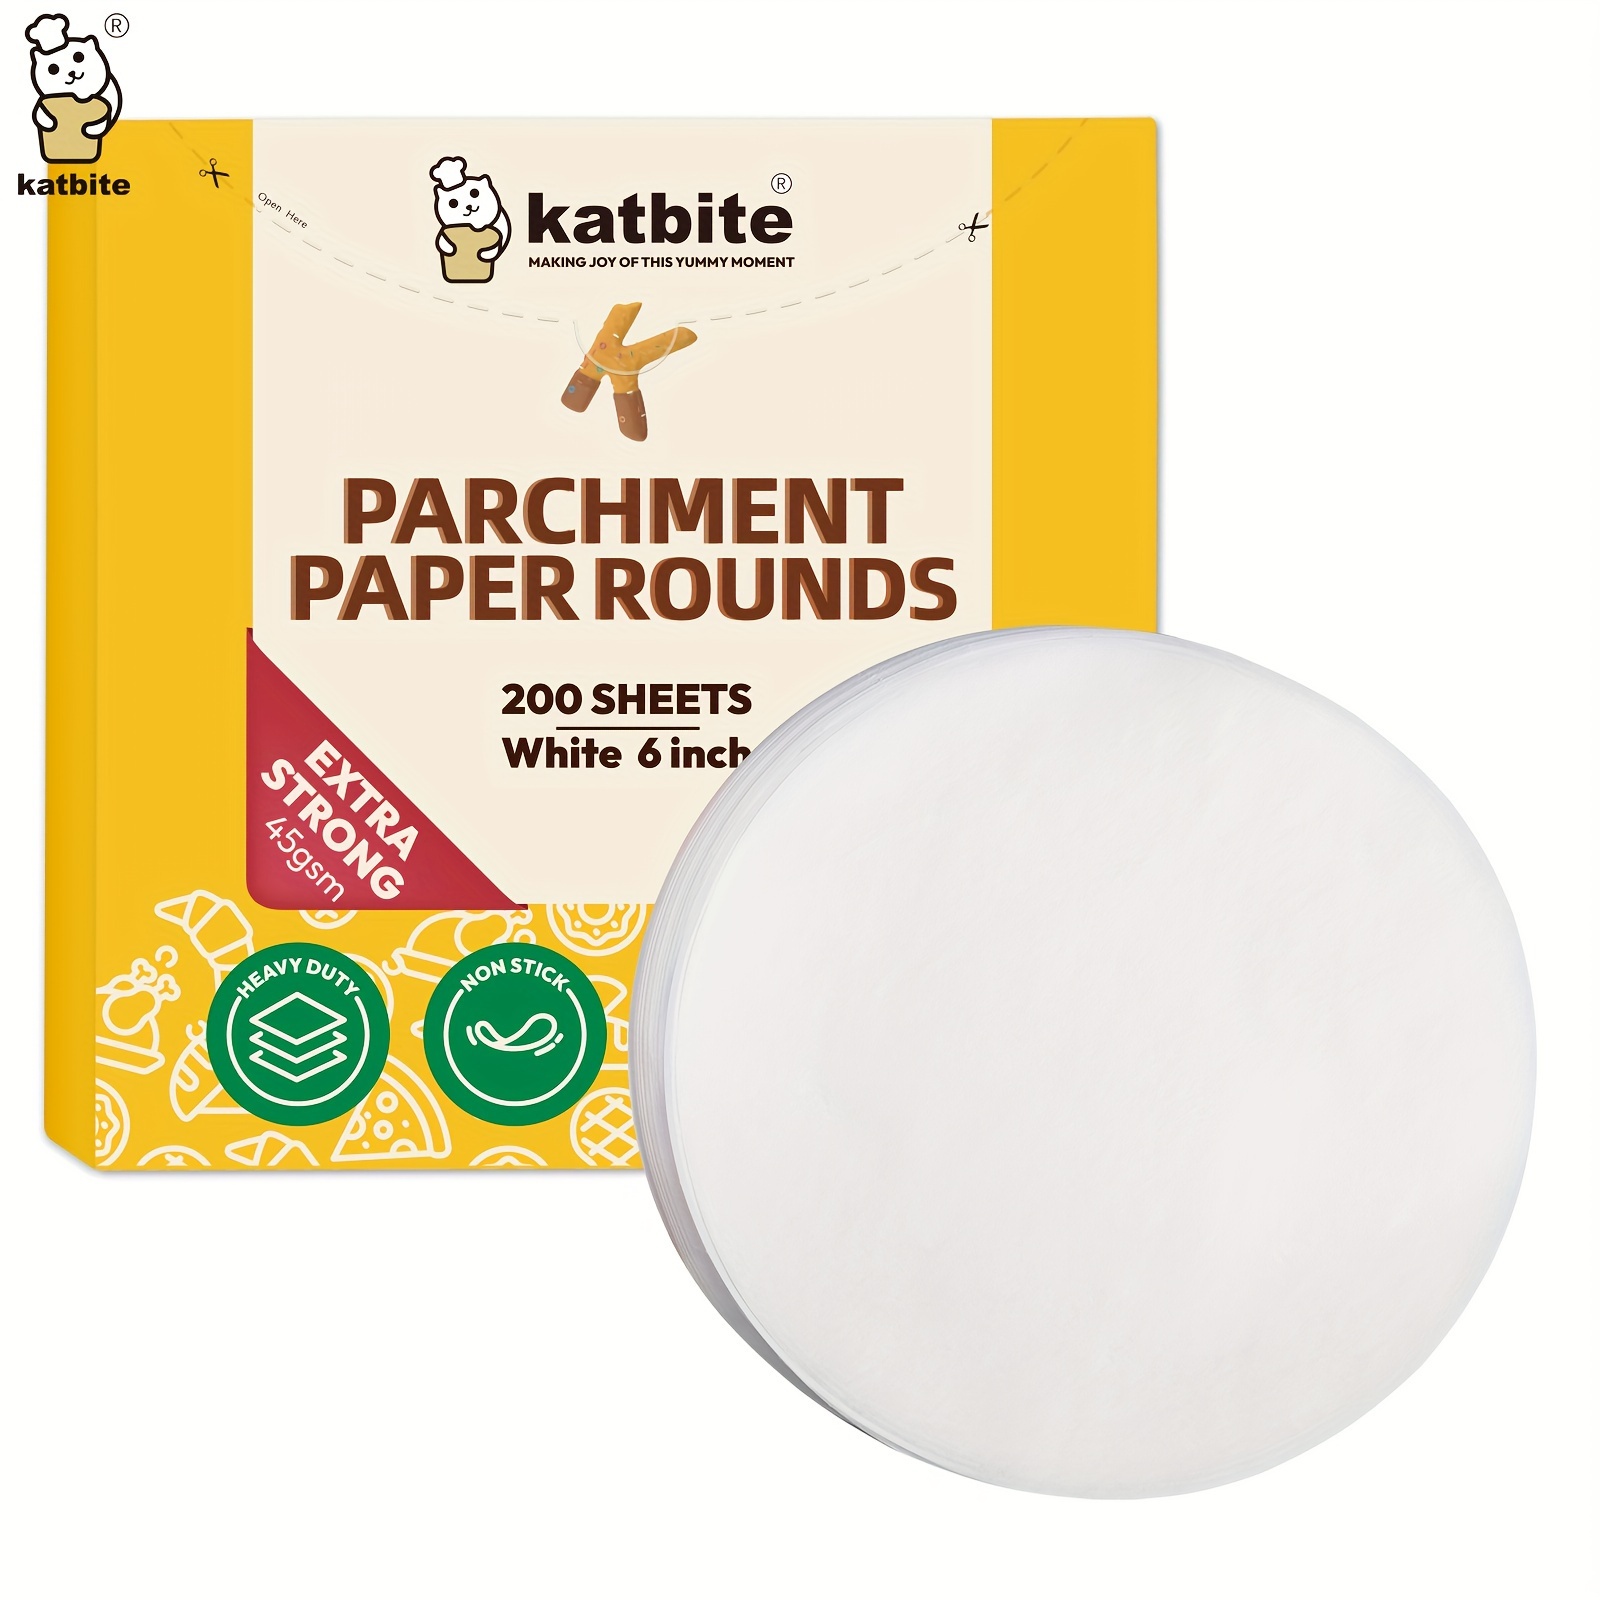 

Katbite 600pcs 5''/6''/7''/8''/9''/10''/12'' Parchment Paper Rounds, Round Baking Sheets Paper For Patty Separating, Freezing, Springform Cake Tin, Toaster Oven, Tortilla Press